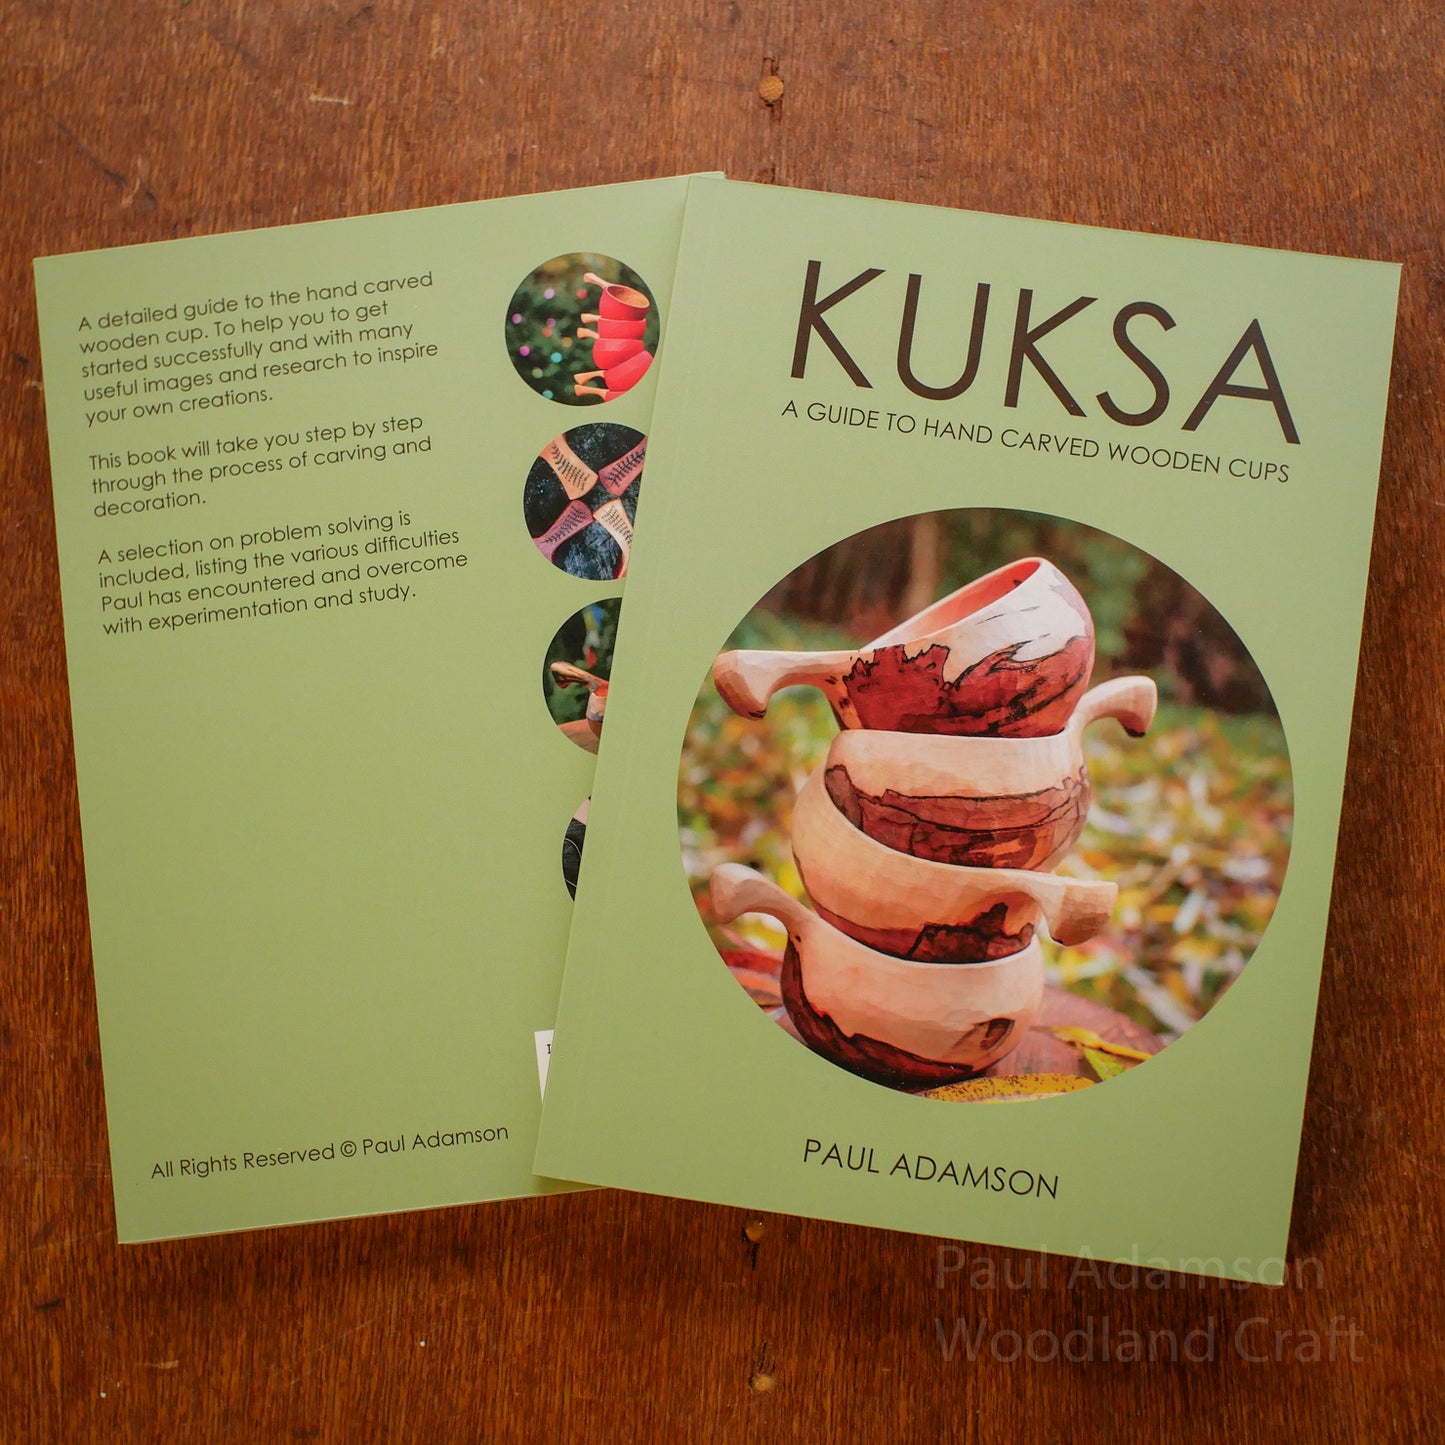 Kuksa - A Guide To Hand Carved Wooden Cups 2nd edition ISBN 978-1-3999-4893-7